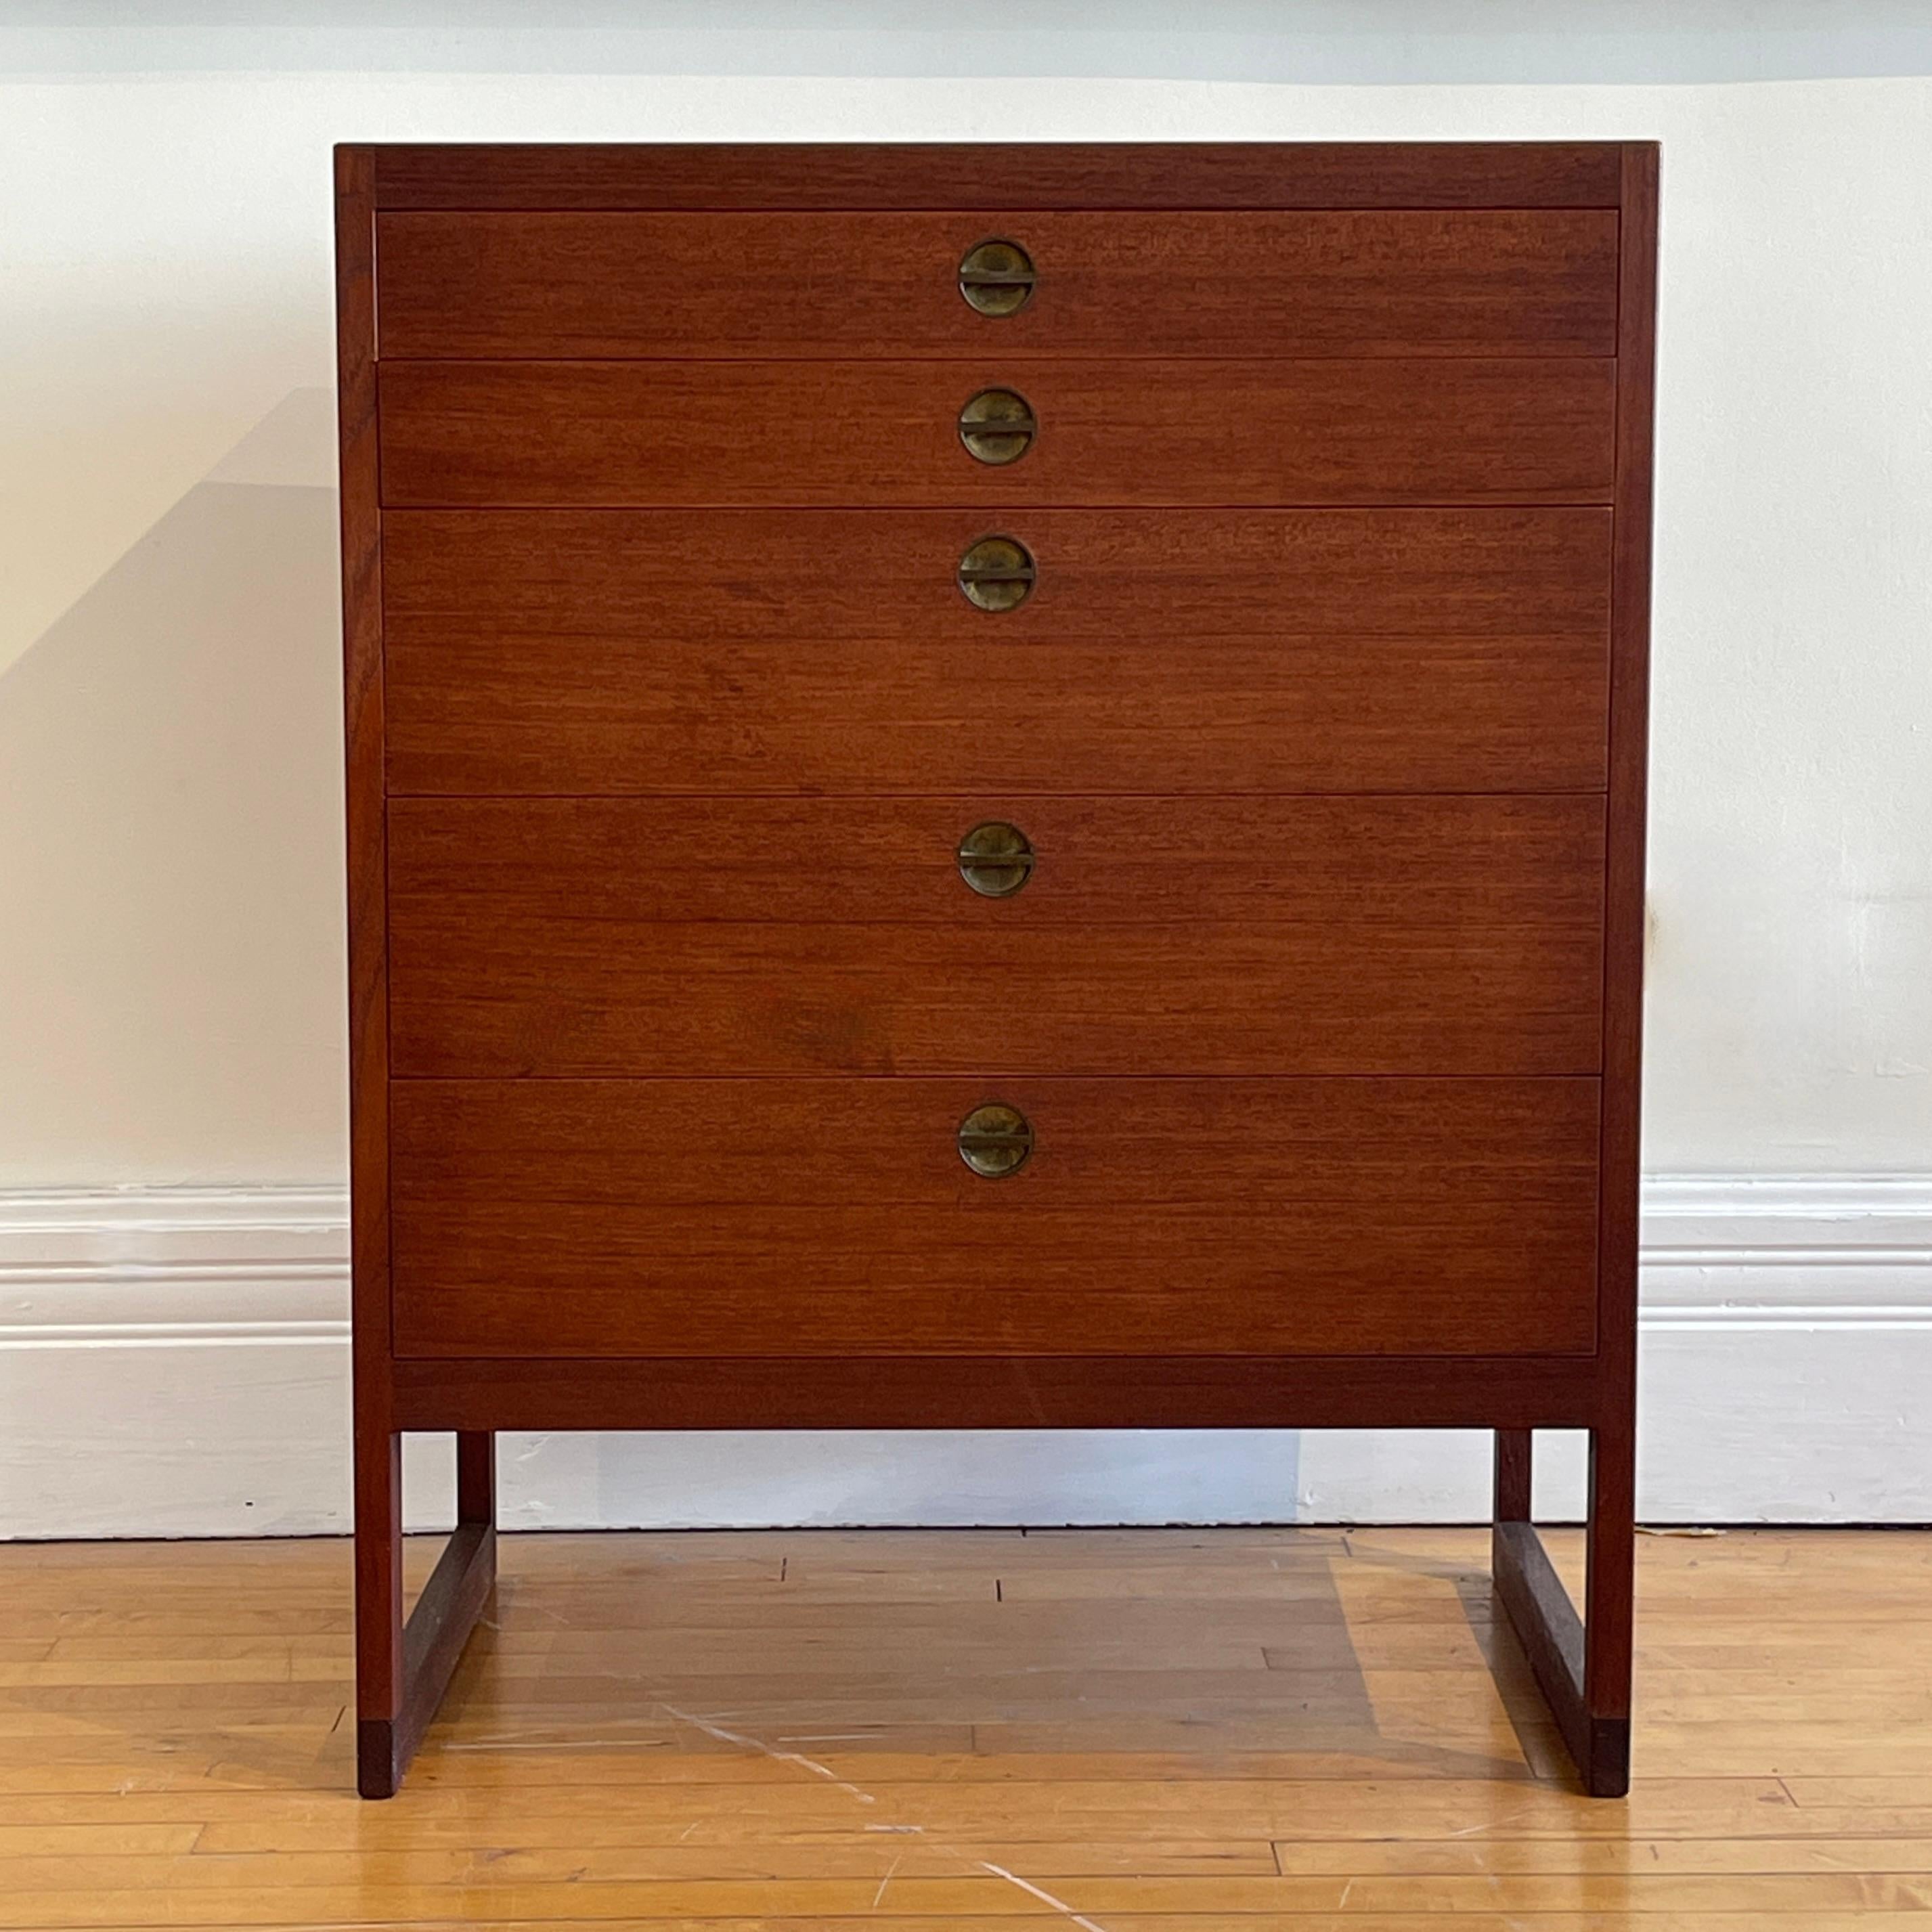 A mid century Danish modern chest of drawers designed by Børge Megensen for cabinetmaker Povl Dinesen of Copenhagen, Denmark. Teak wood construction with two shallow drawers over three deeper drawers, all with lovely sculptural inset brass pulls,